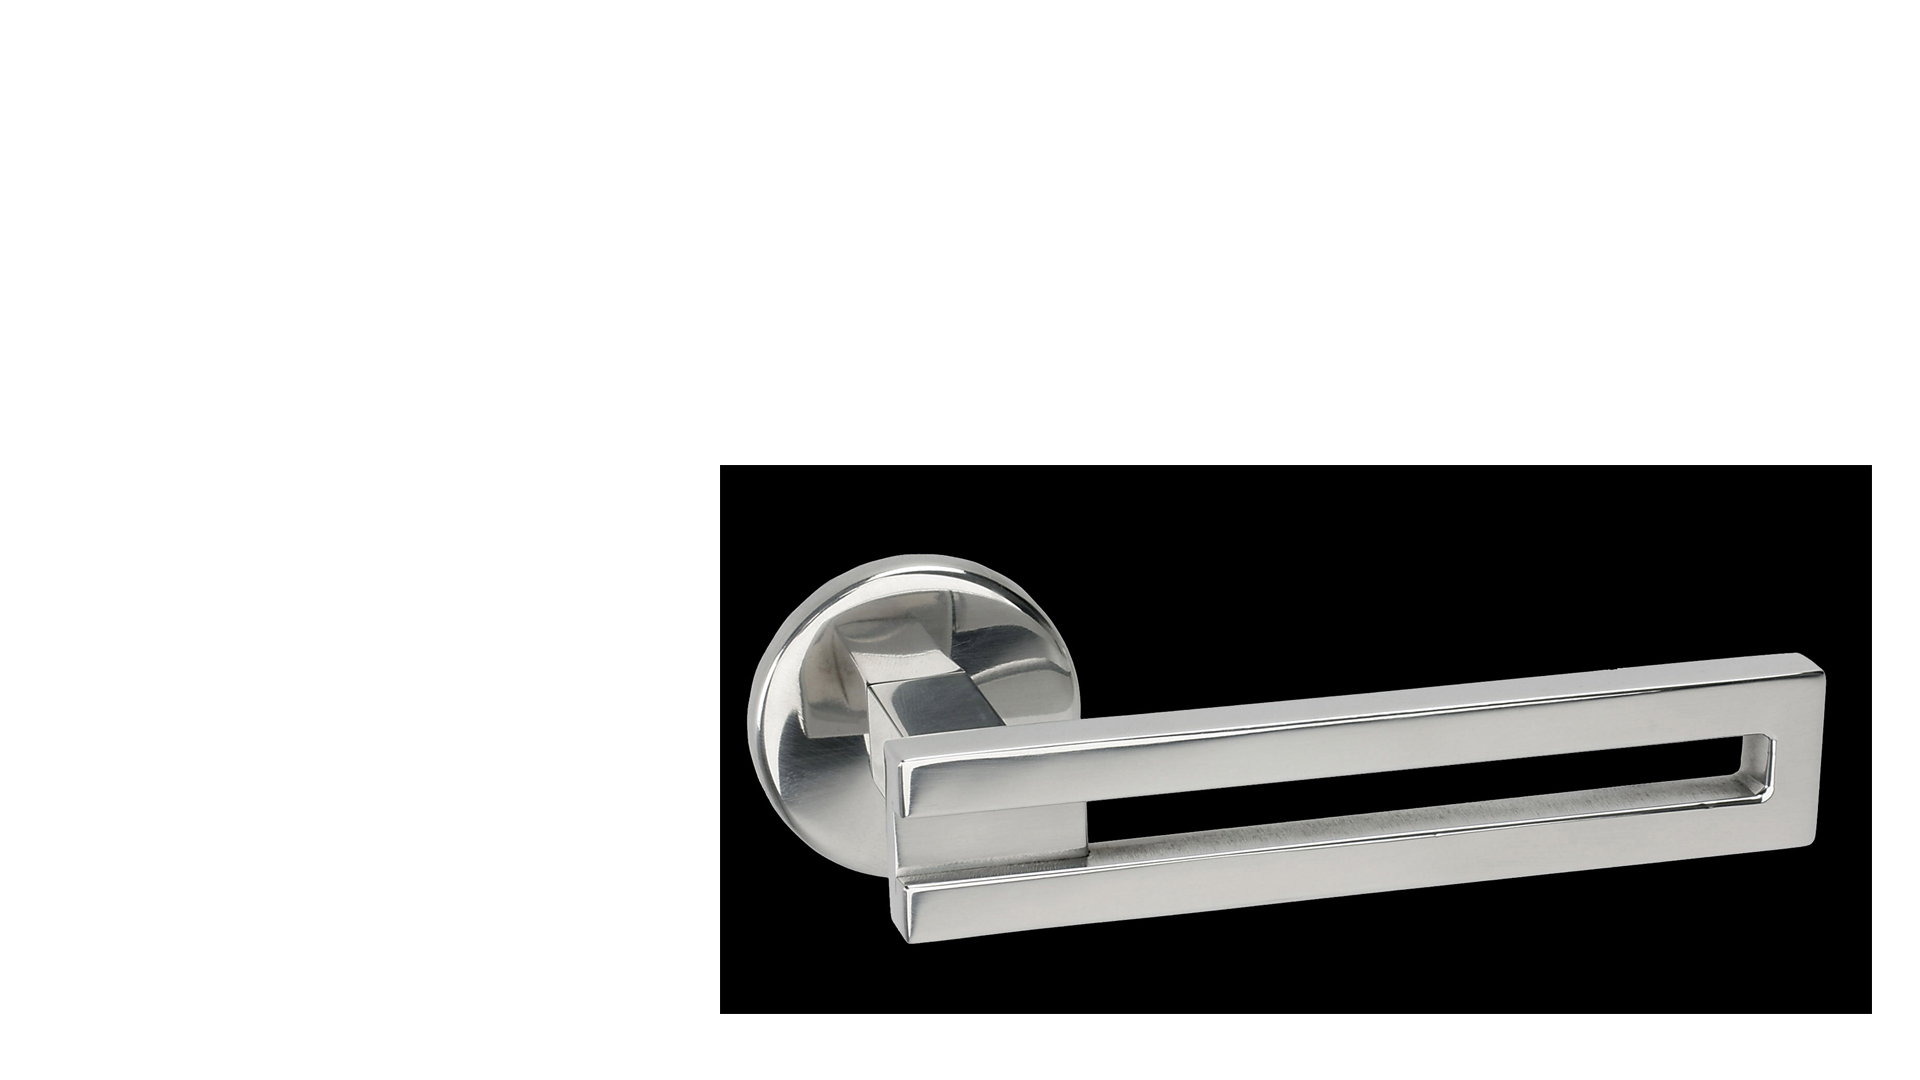 Stainless Steel Lever handle from the Parallel Range. A suite of ironmongery designed by Keith Williams